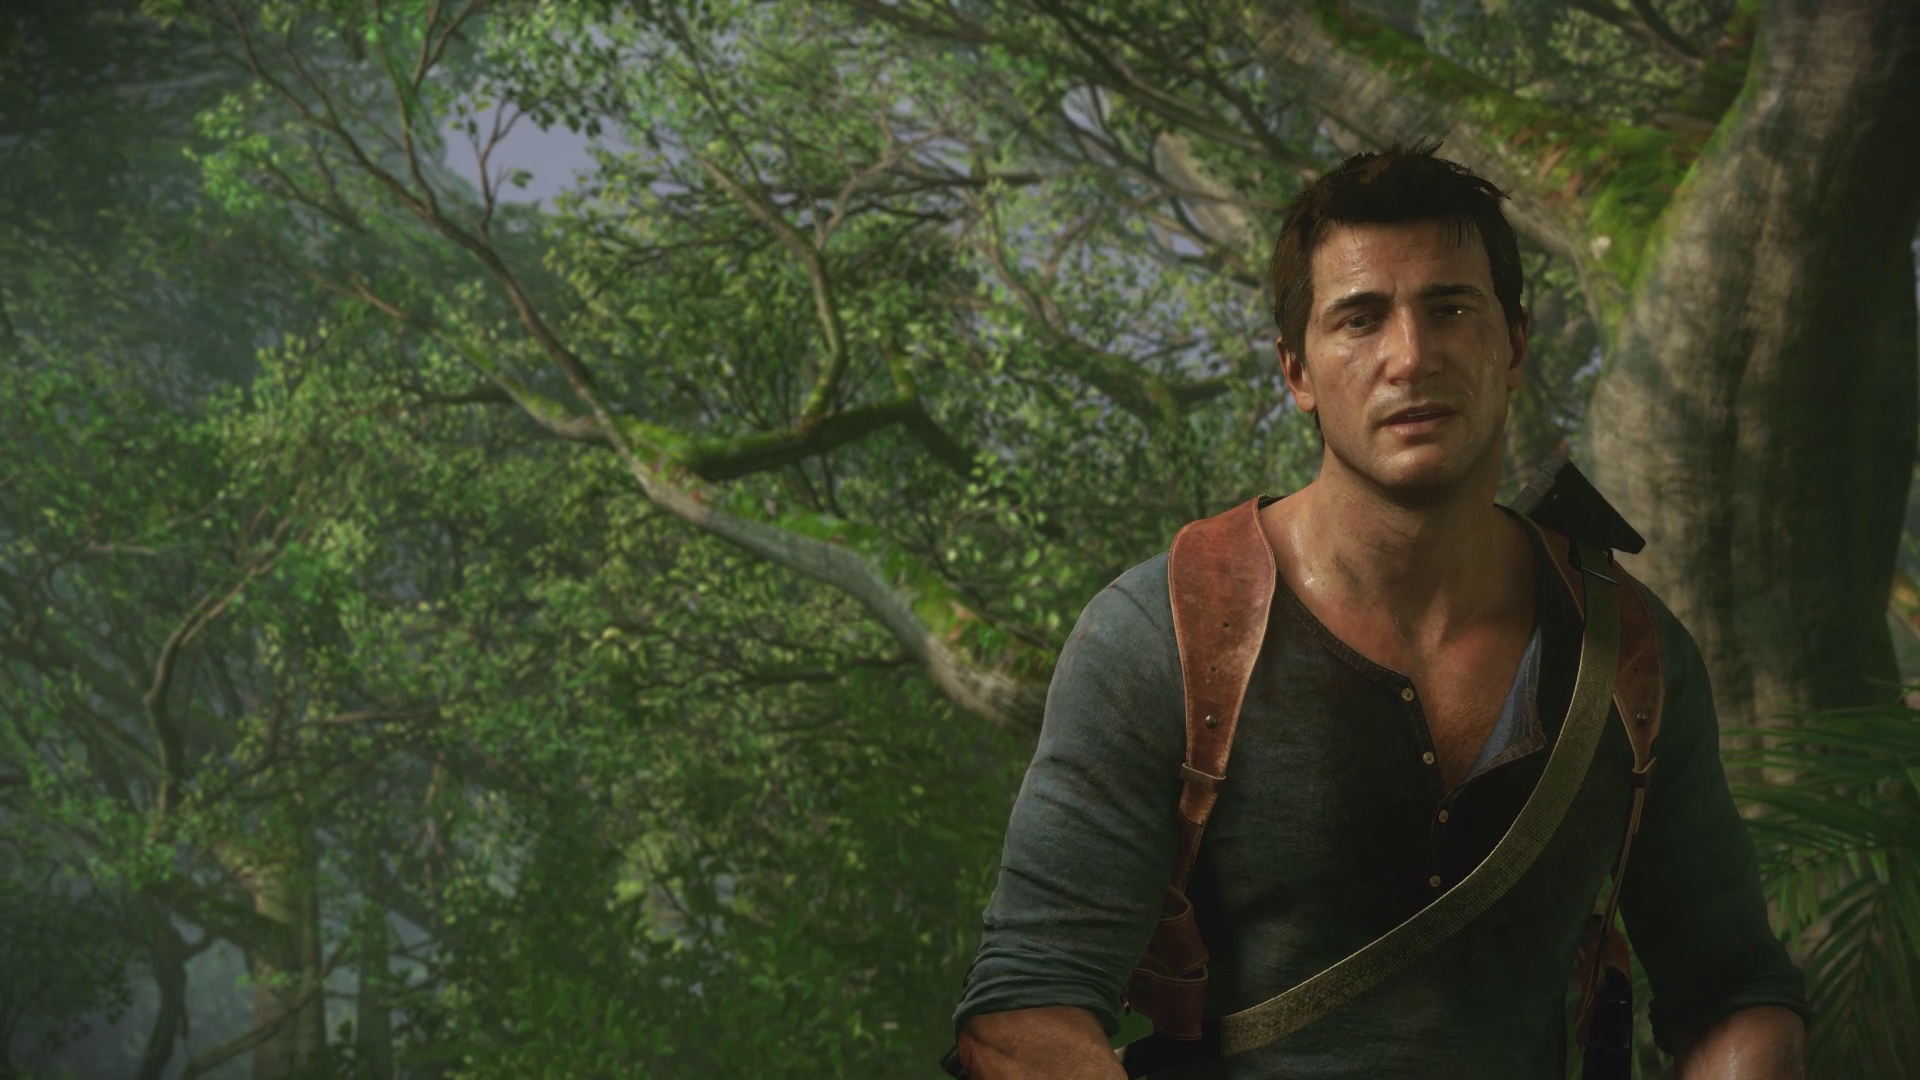 So there's been some Uncharted 4 stuff going on